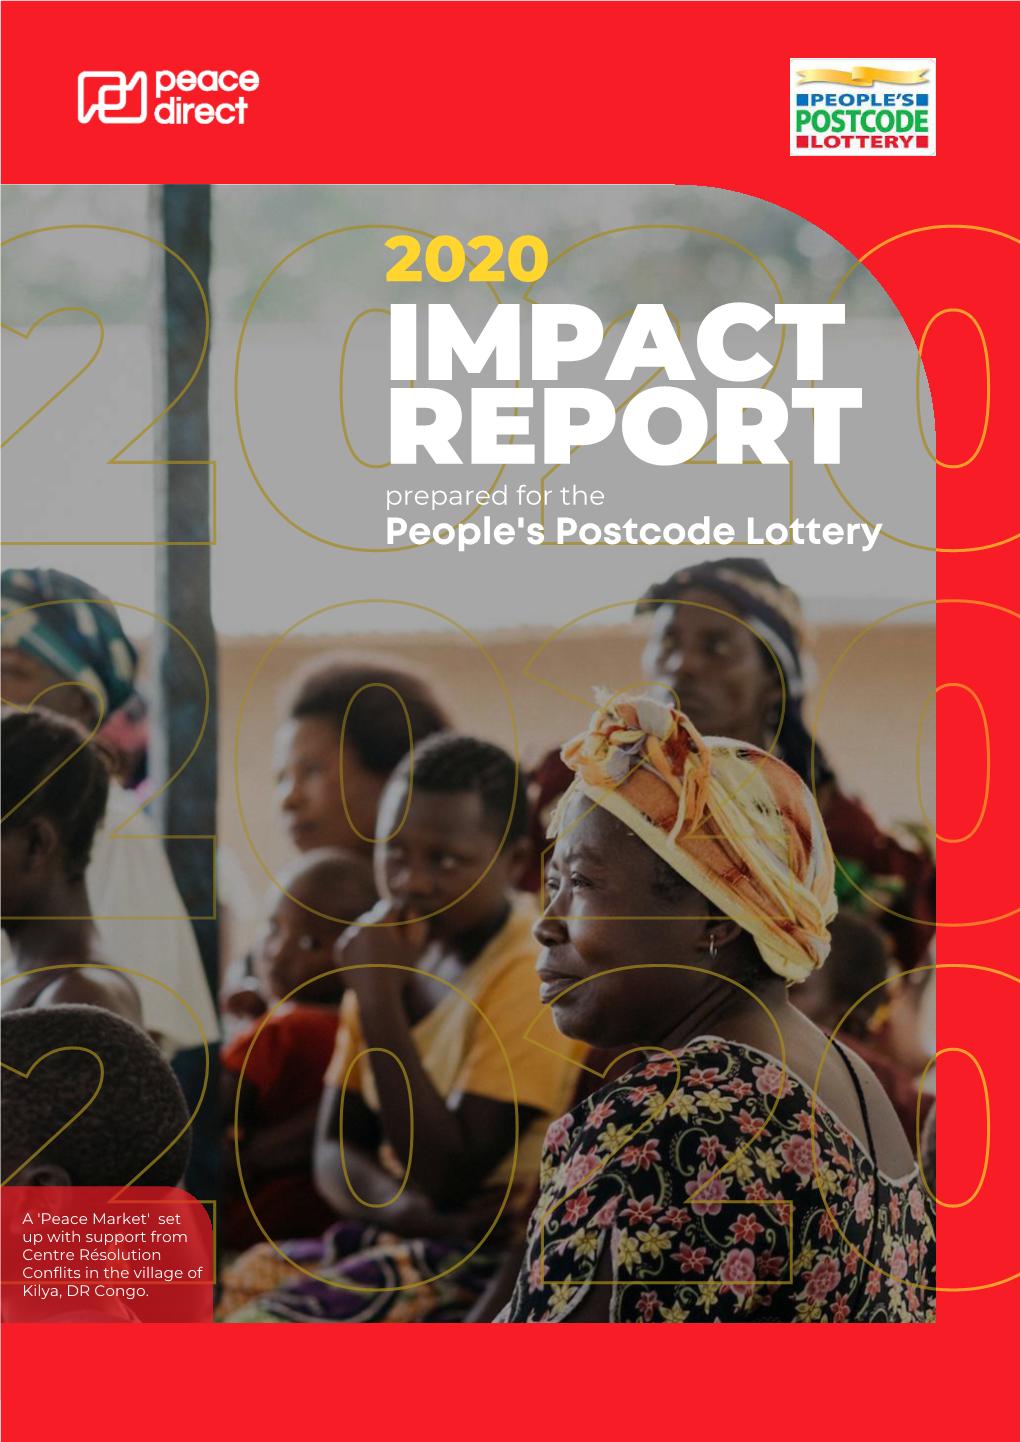 2020 IMPACT REPORT Prepared for the 20People's2 Postcode Lot0tery 2020